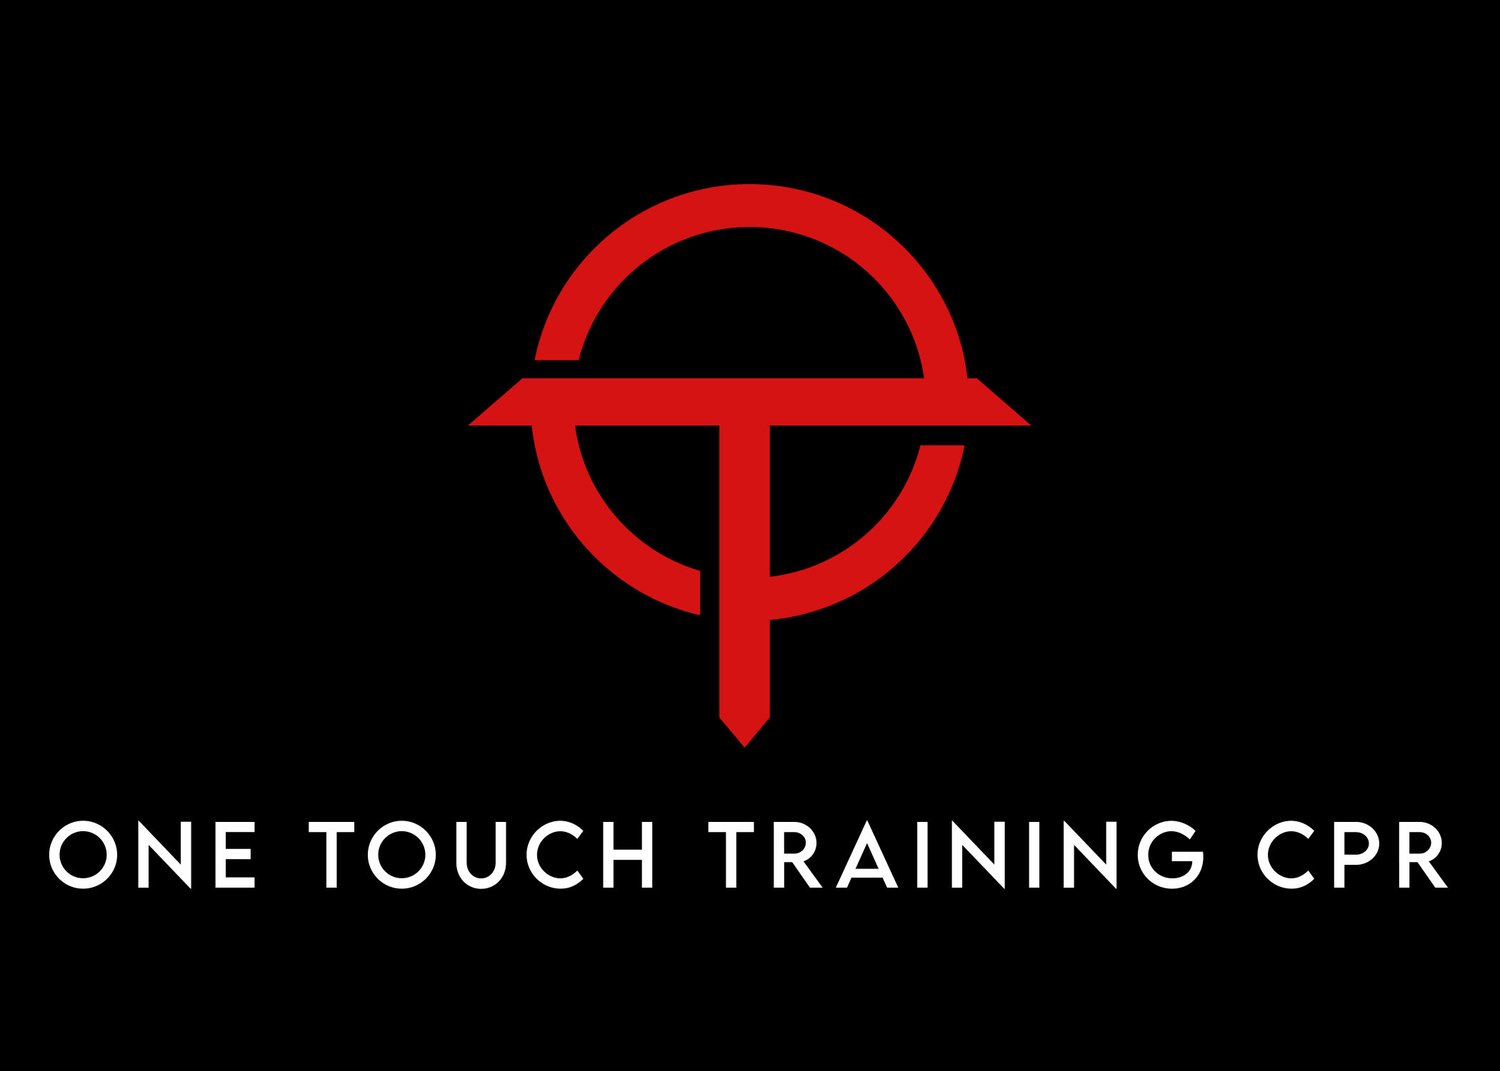 One Touch Training